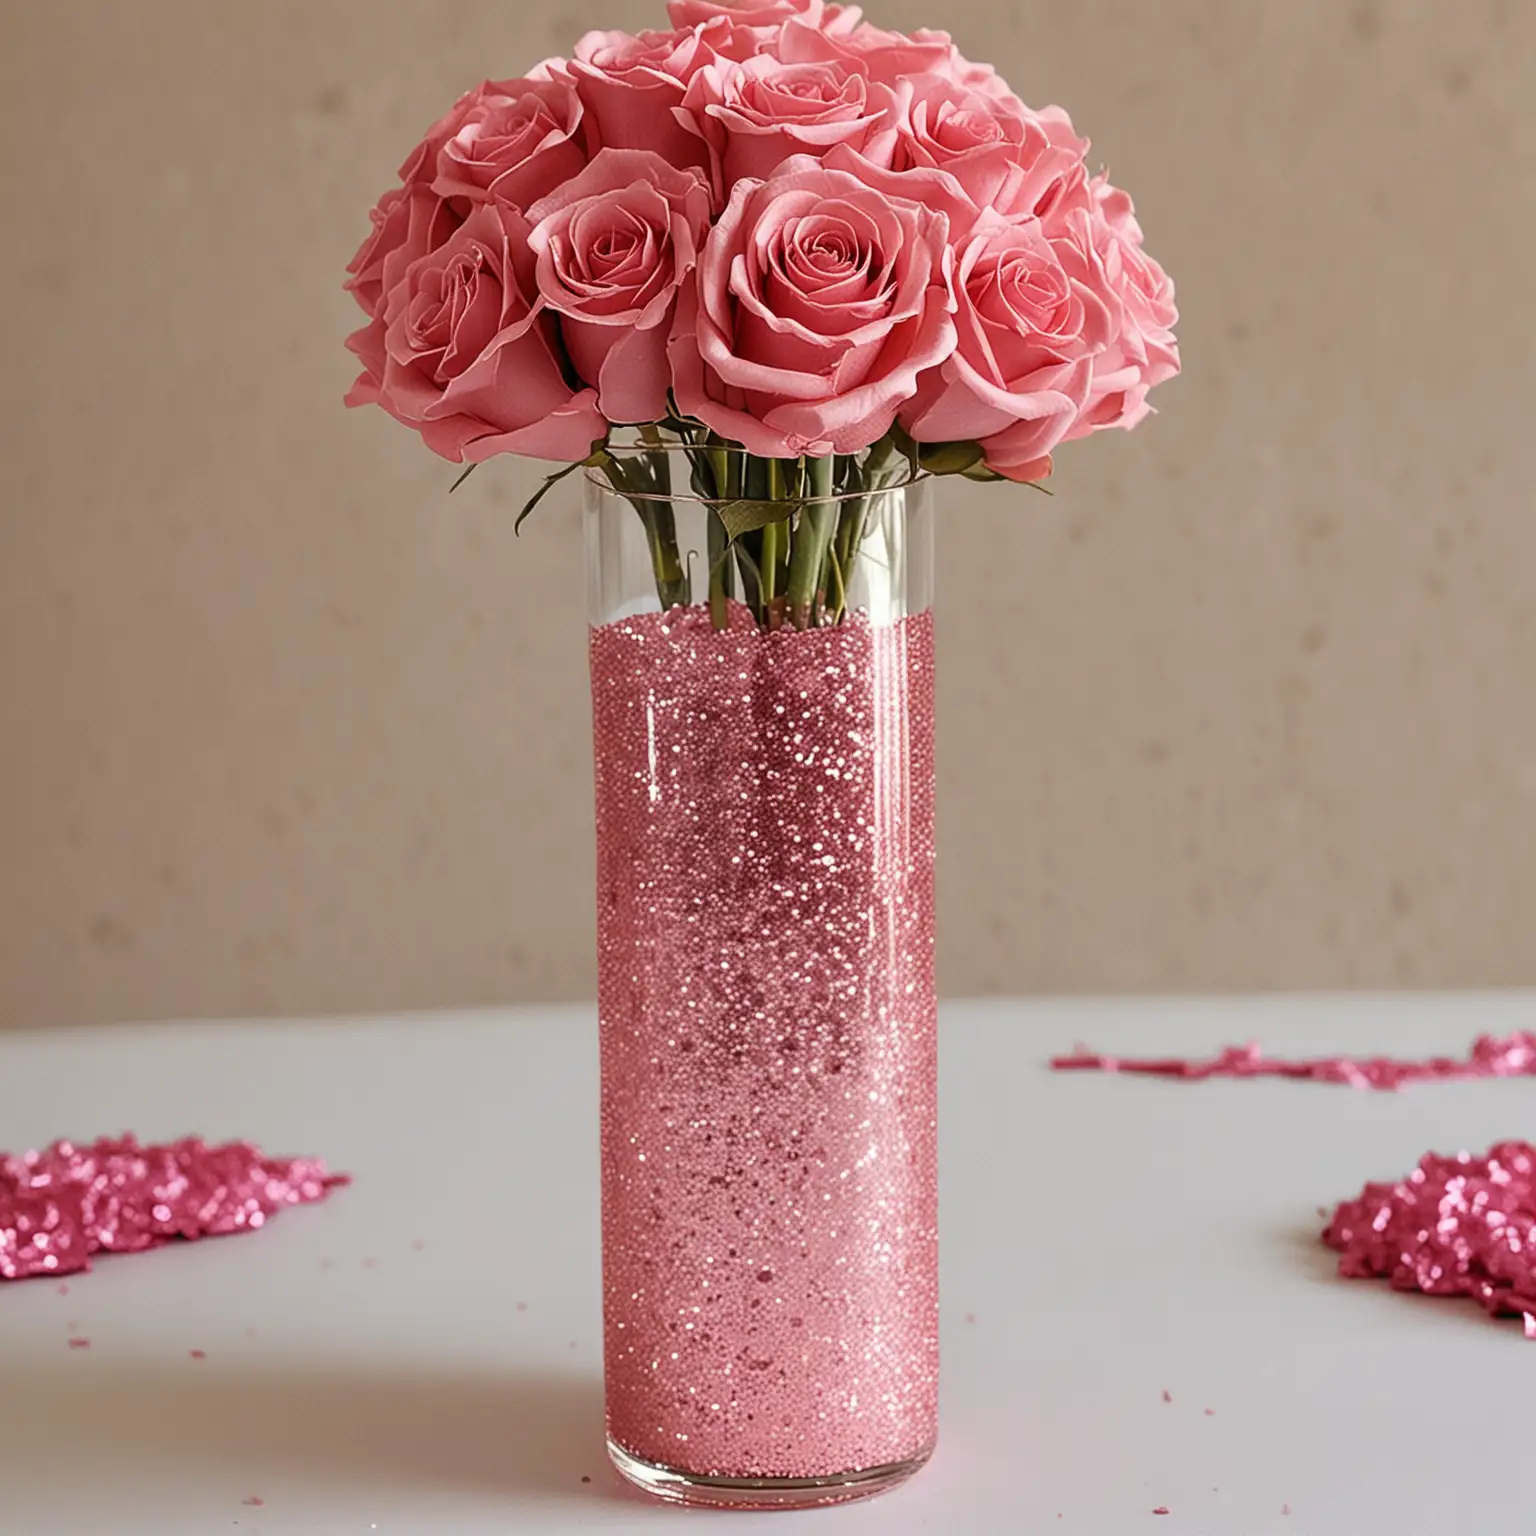 simple cylinder glass vase wedding centerpiece DIY decorated with champagne and rose pink colored glitter